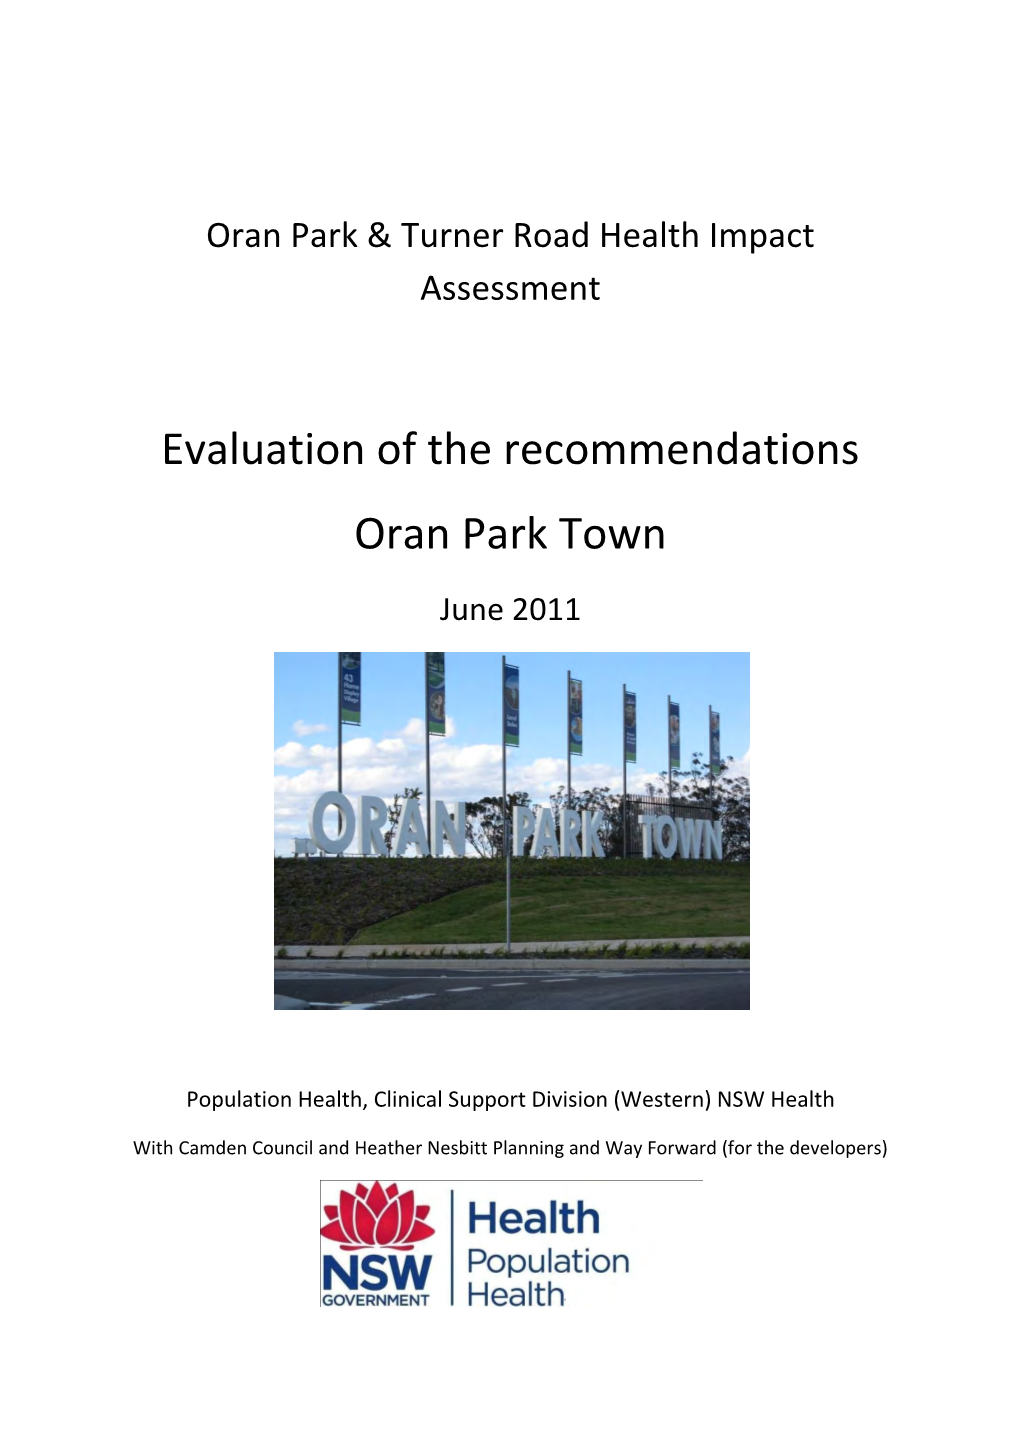 Evaluation of the Recommendations Oran Park Town June 2011